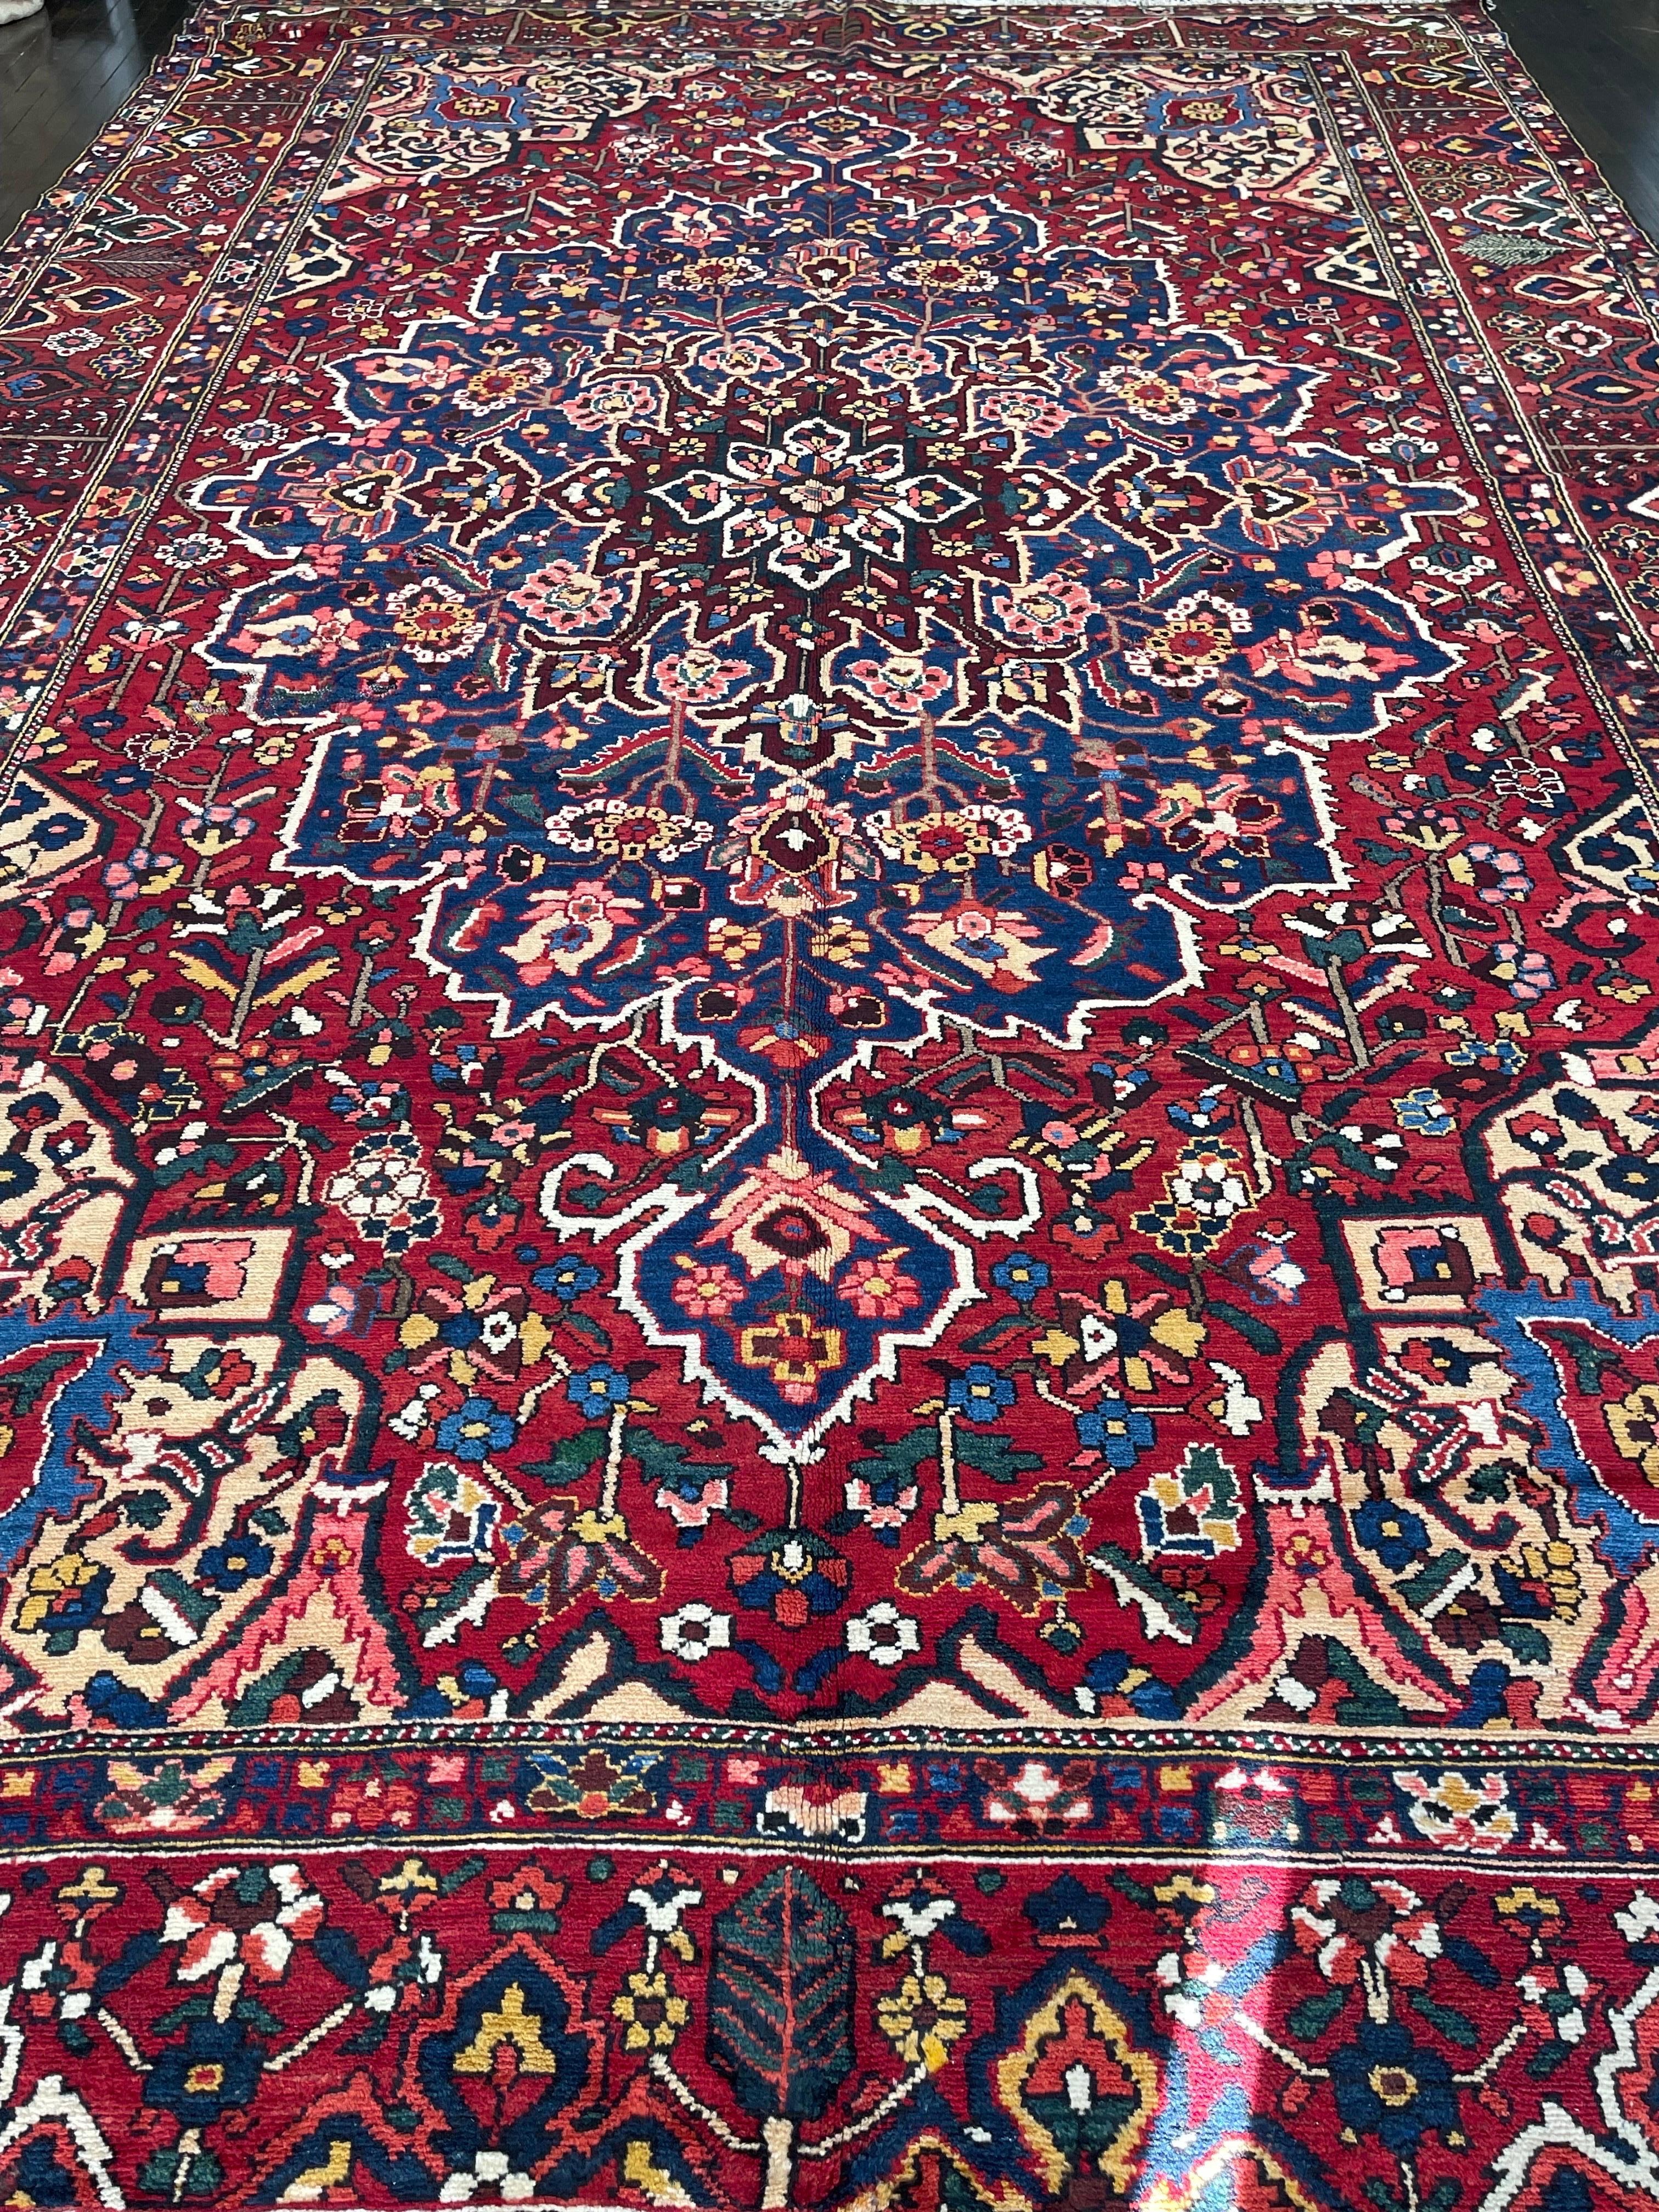 Very handsome tribal Bakhtiari carpet featuring a large medallion on a blue field surrounded by an orange/red border decorated with rosette and cypress trees all in bright brilliant colors. The Bakhtiari tribe settled on the Zagros mountains and